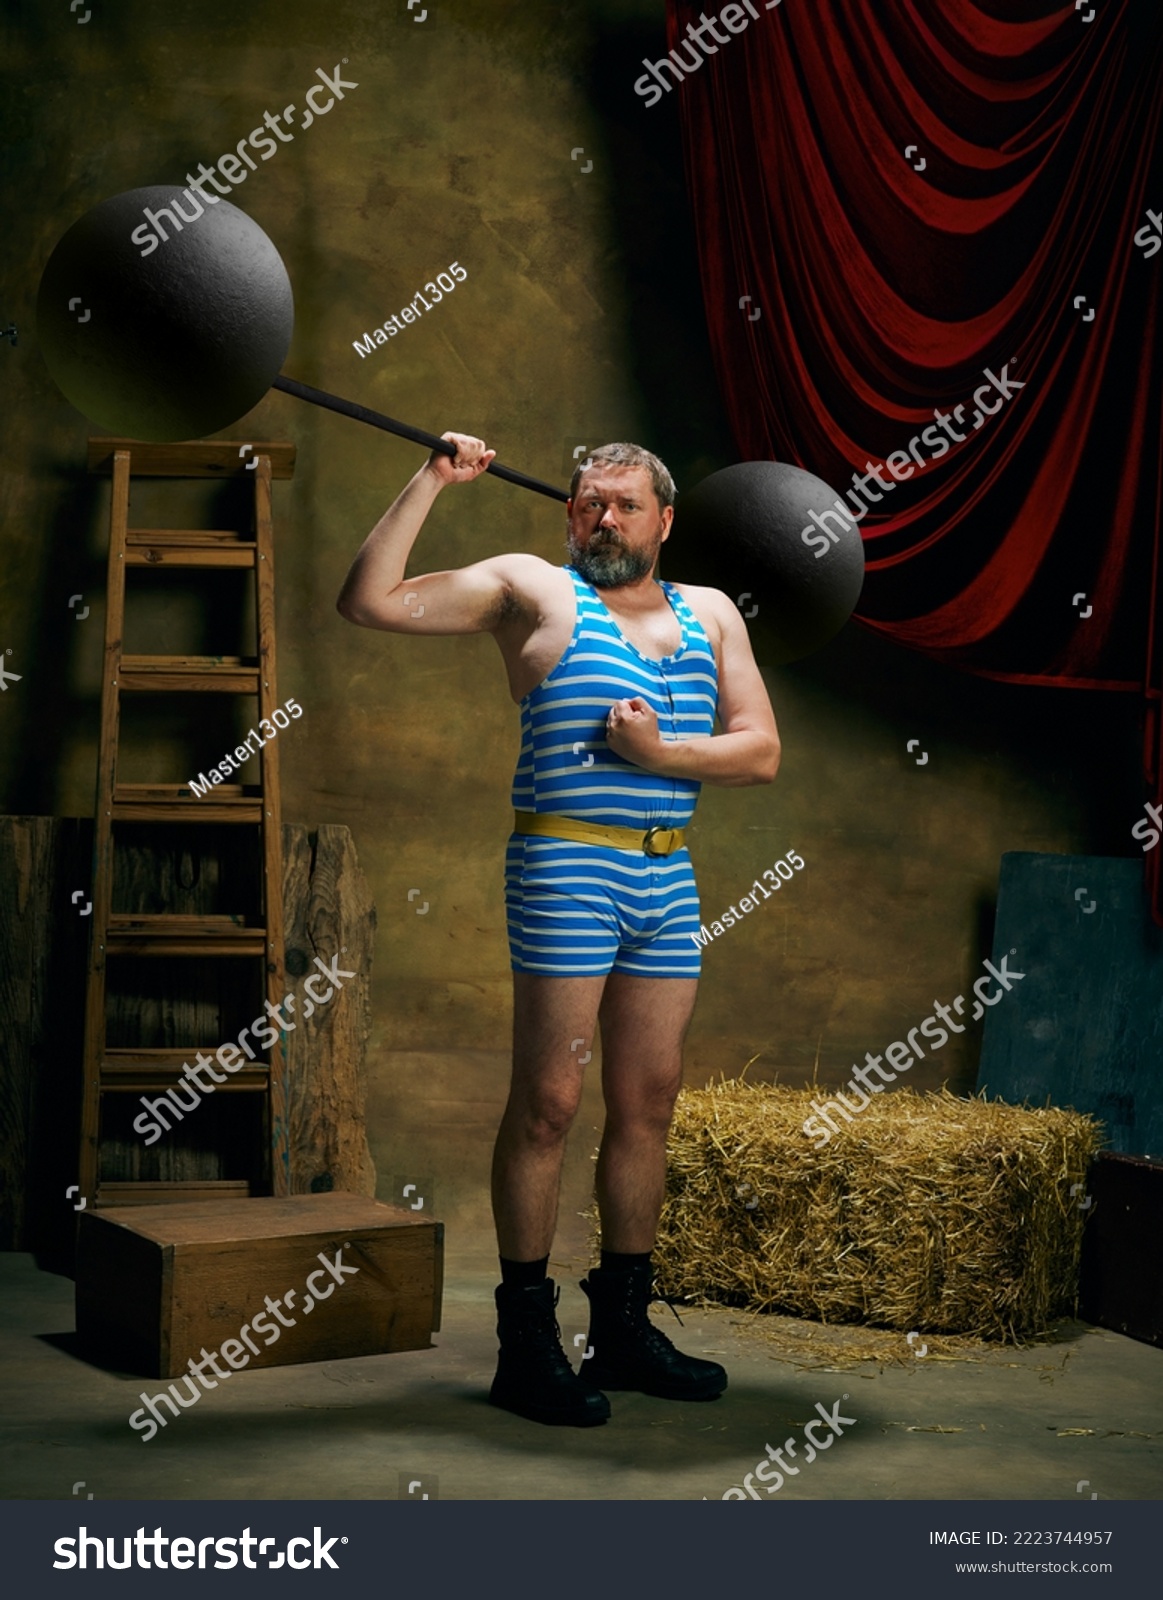 Retro circus. Cinematic portrait of retro circus strongman wearing striped sports swimsuit holding barbell on dark circus backstage background. Concept of creative art, fashion, style and inspiration #2223744957